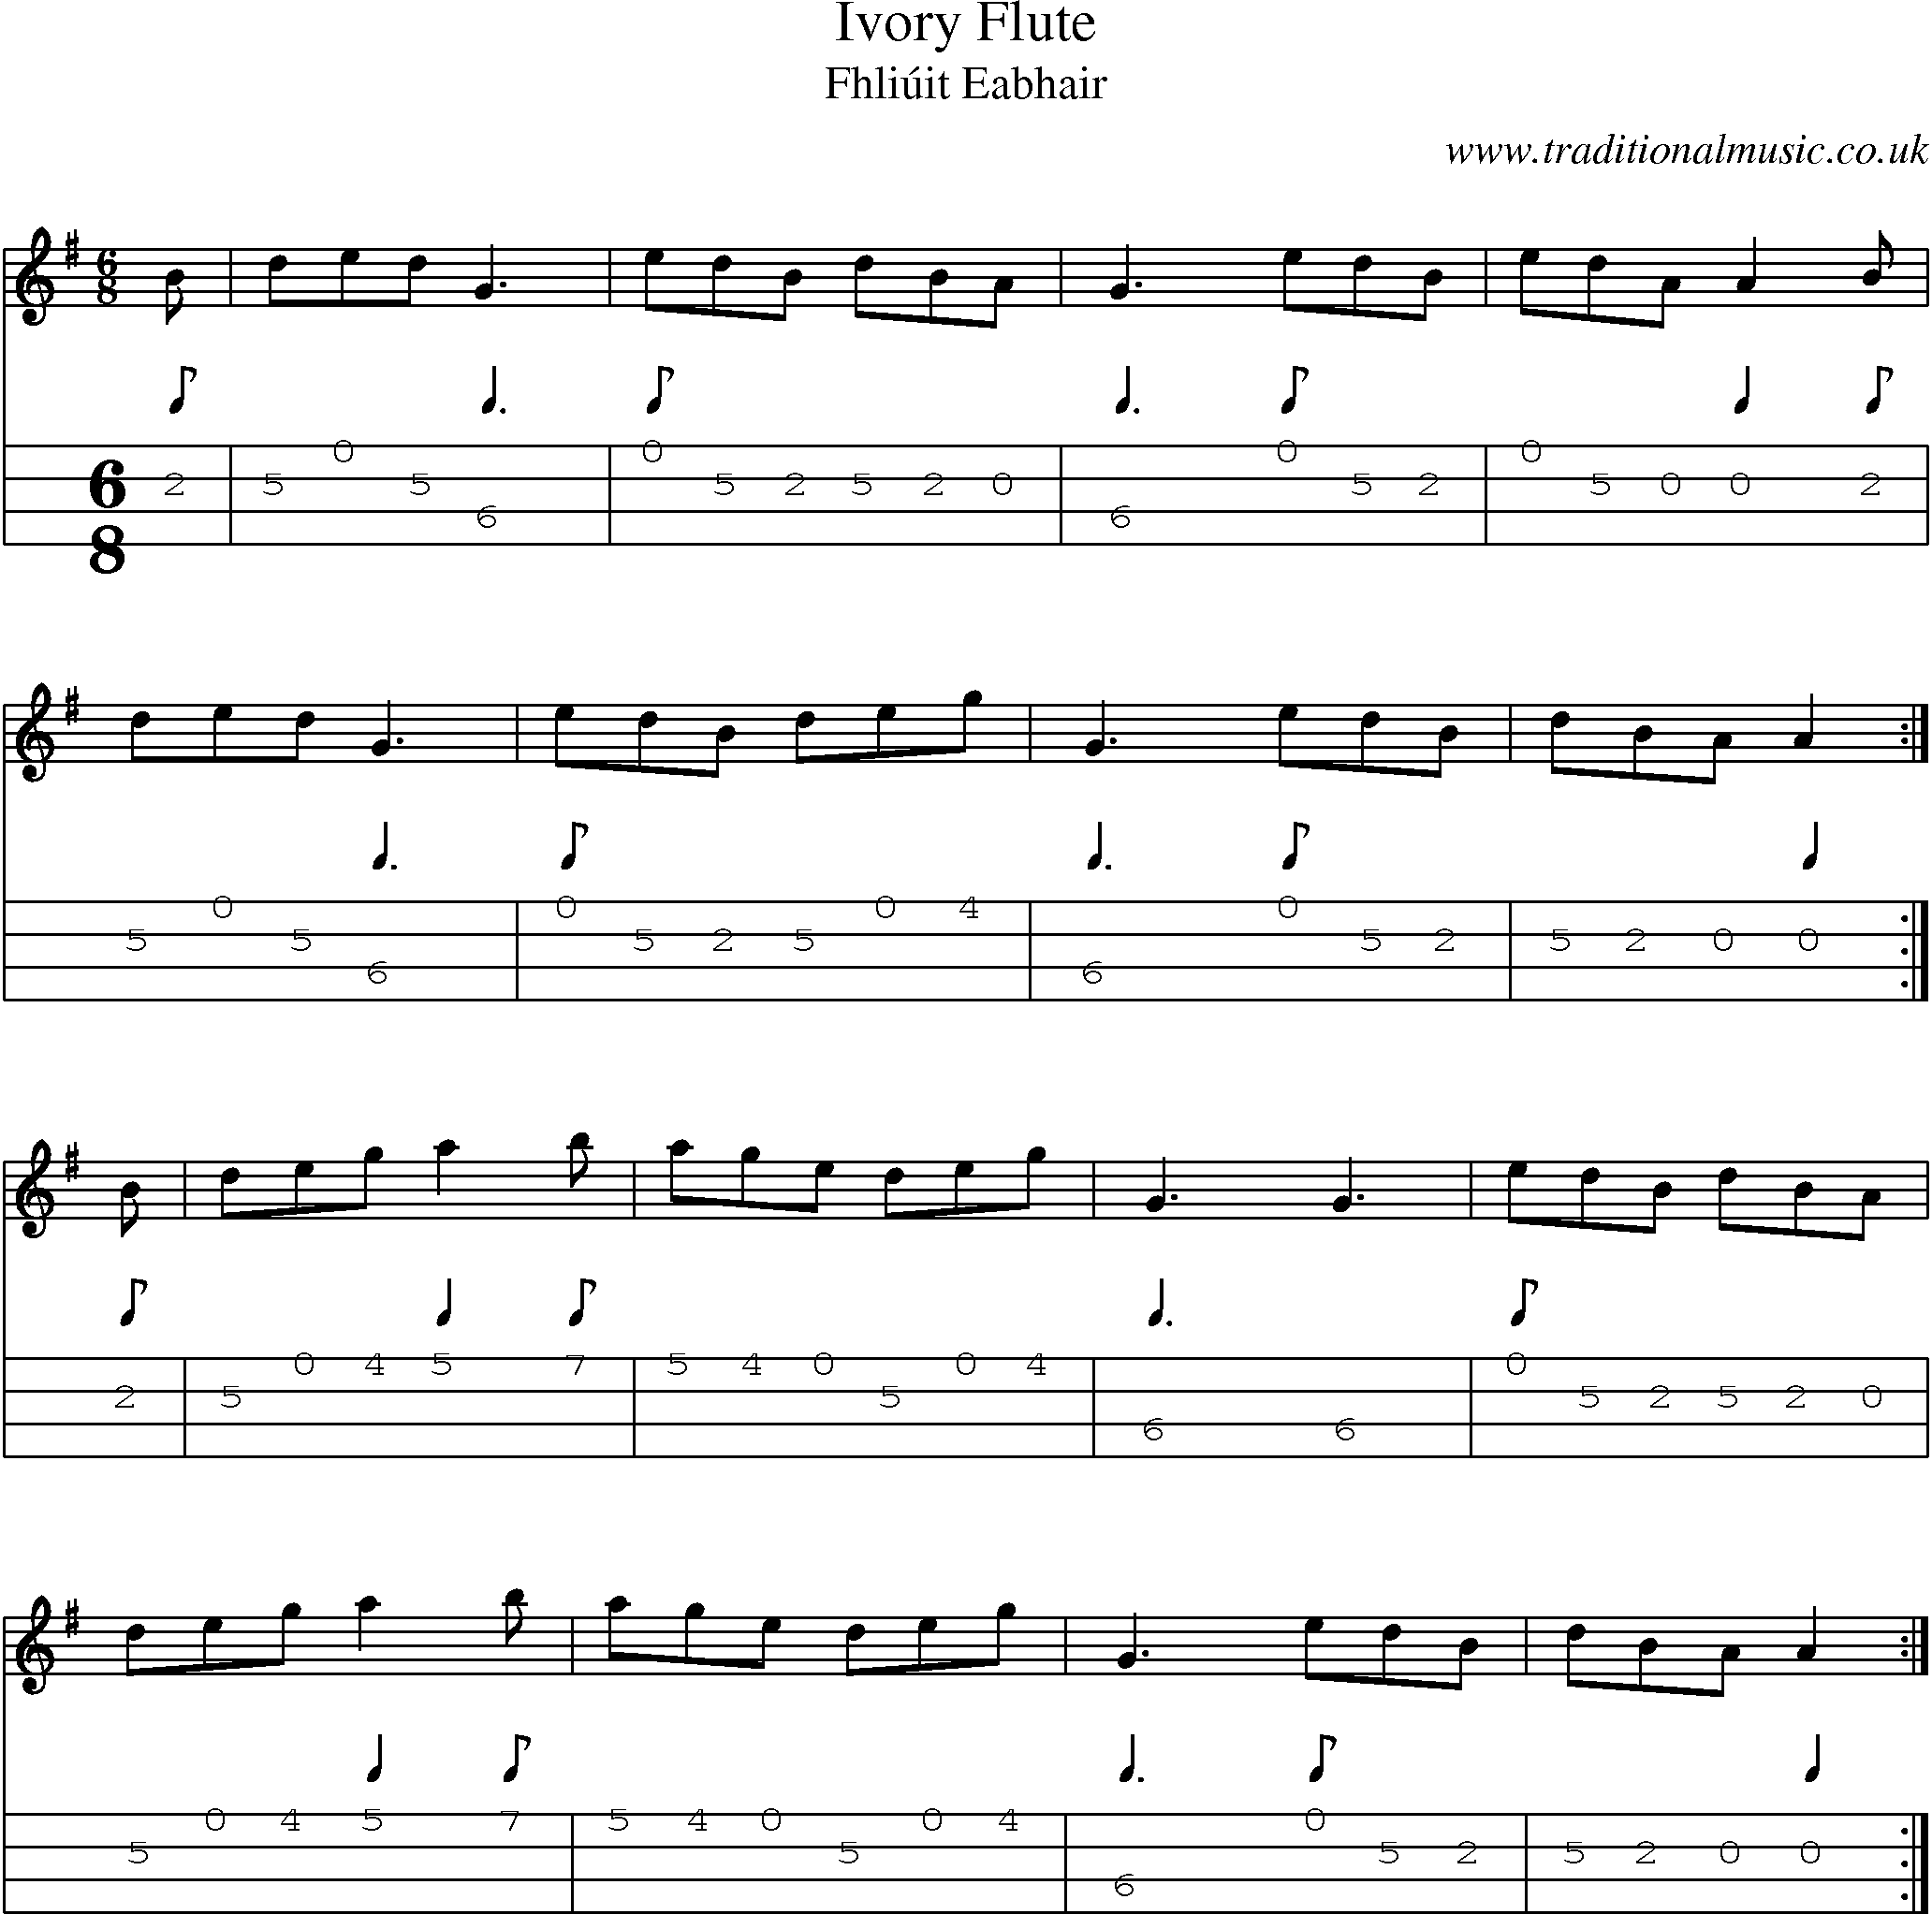 Music Score and Mandolin Tabs for Ivory Flute